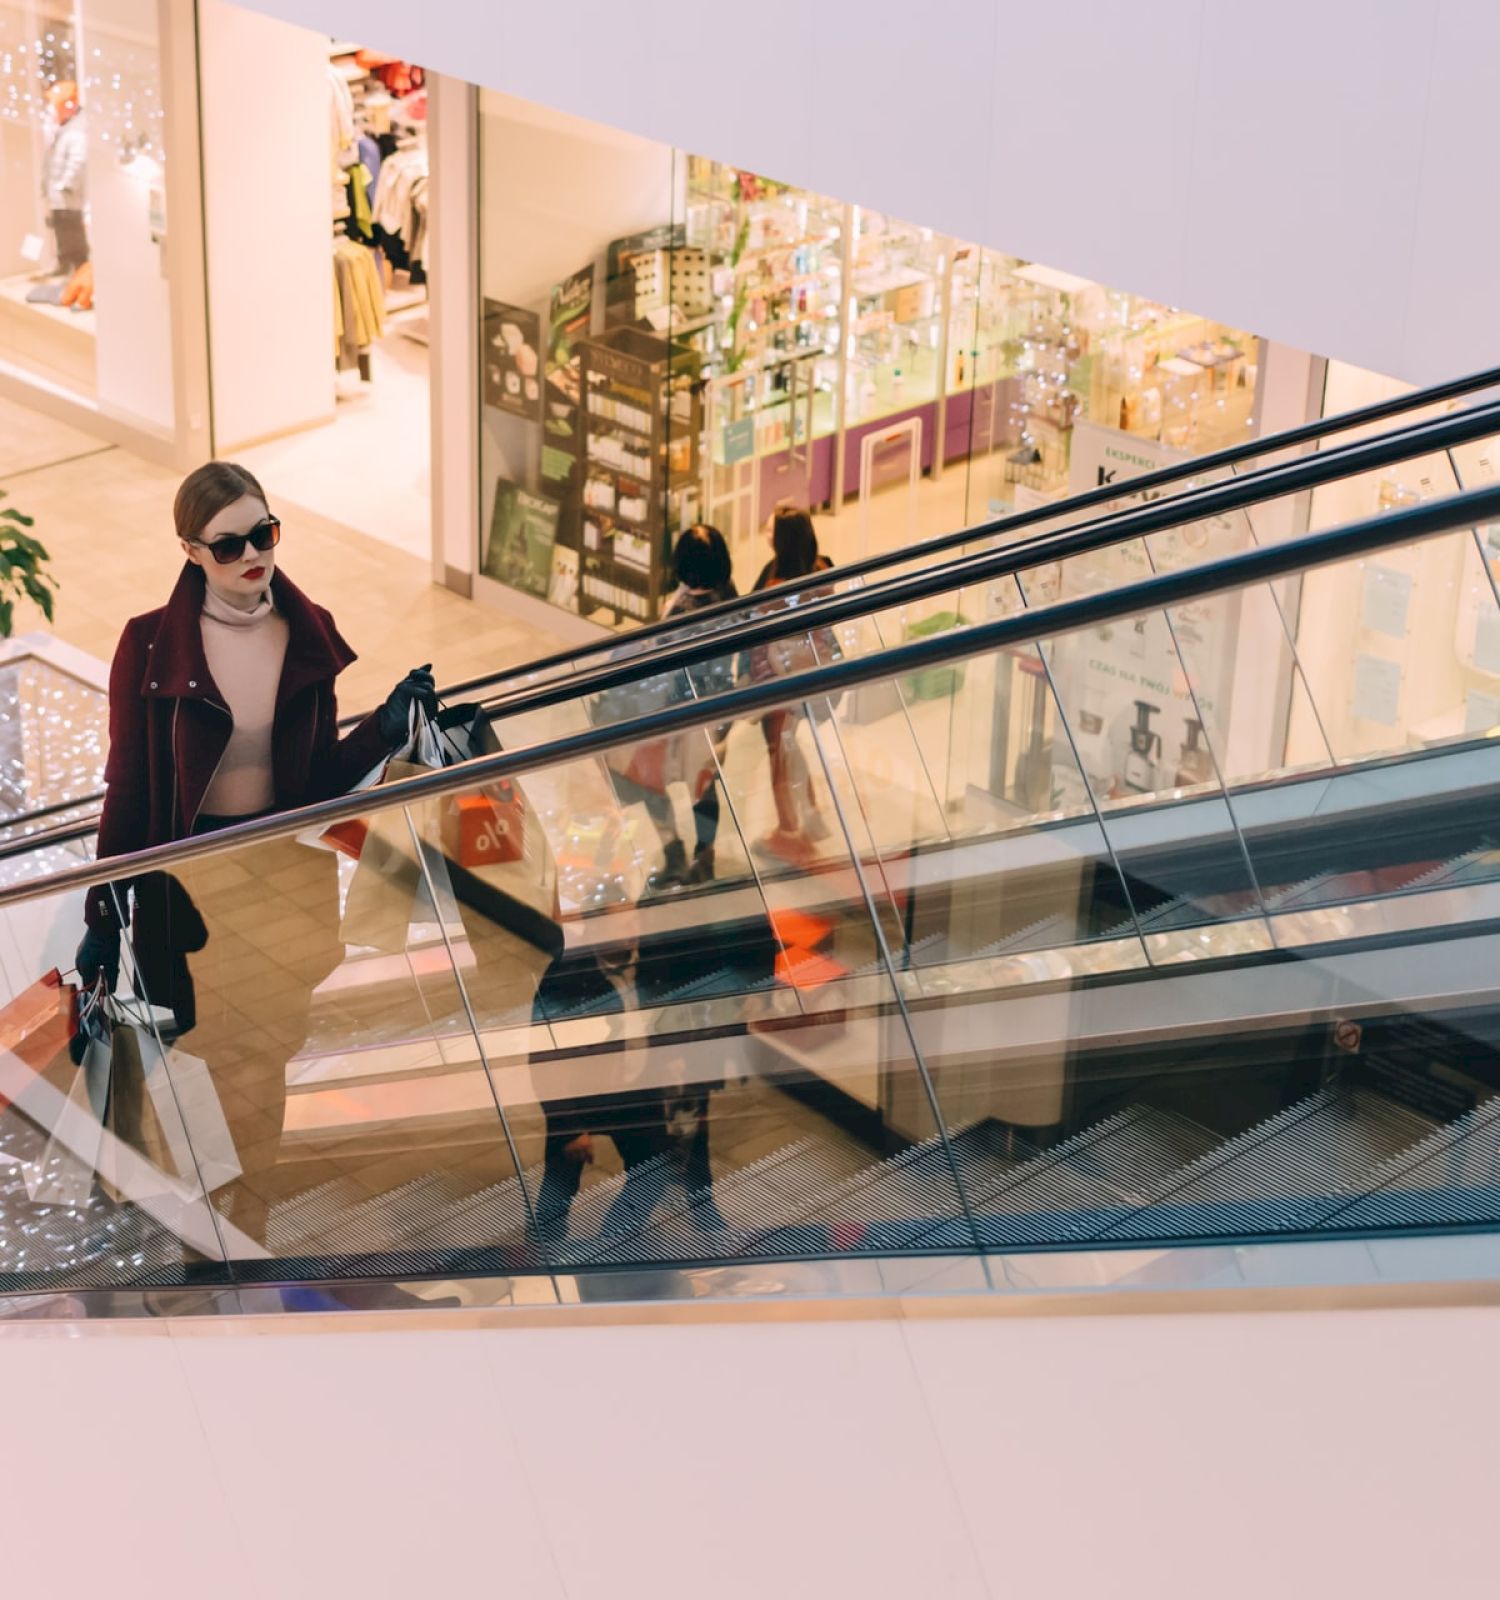 A person with sunglasses and a coat is on an escalator in a shopping mall, carrying shopping bags. The background shows various store fronts.